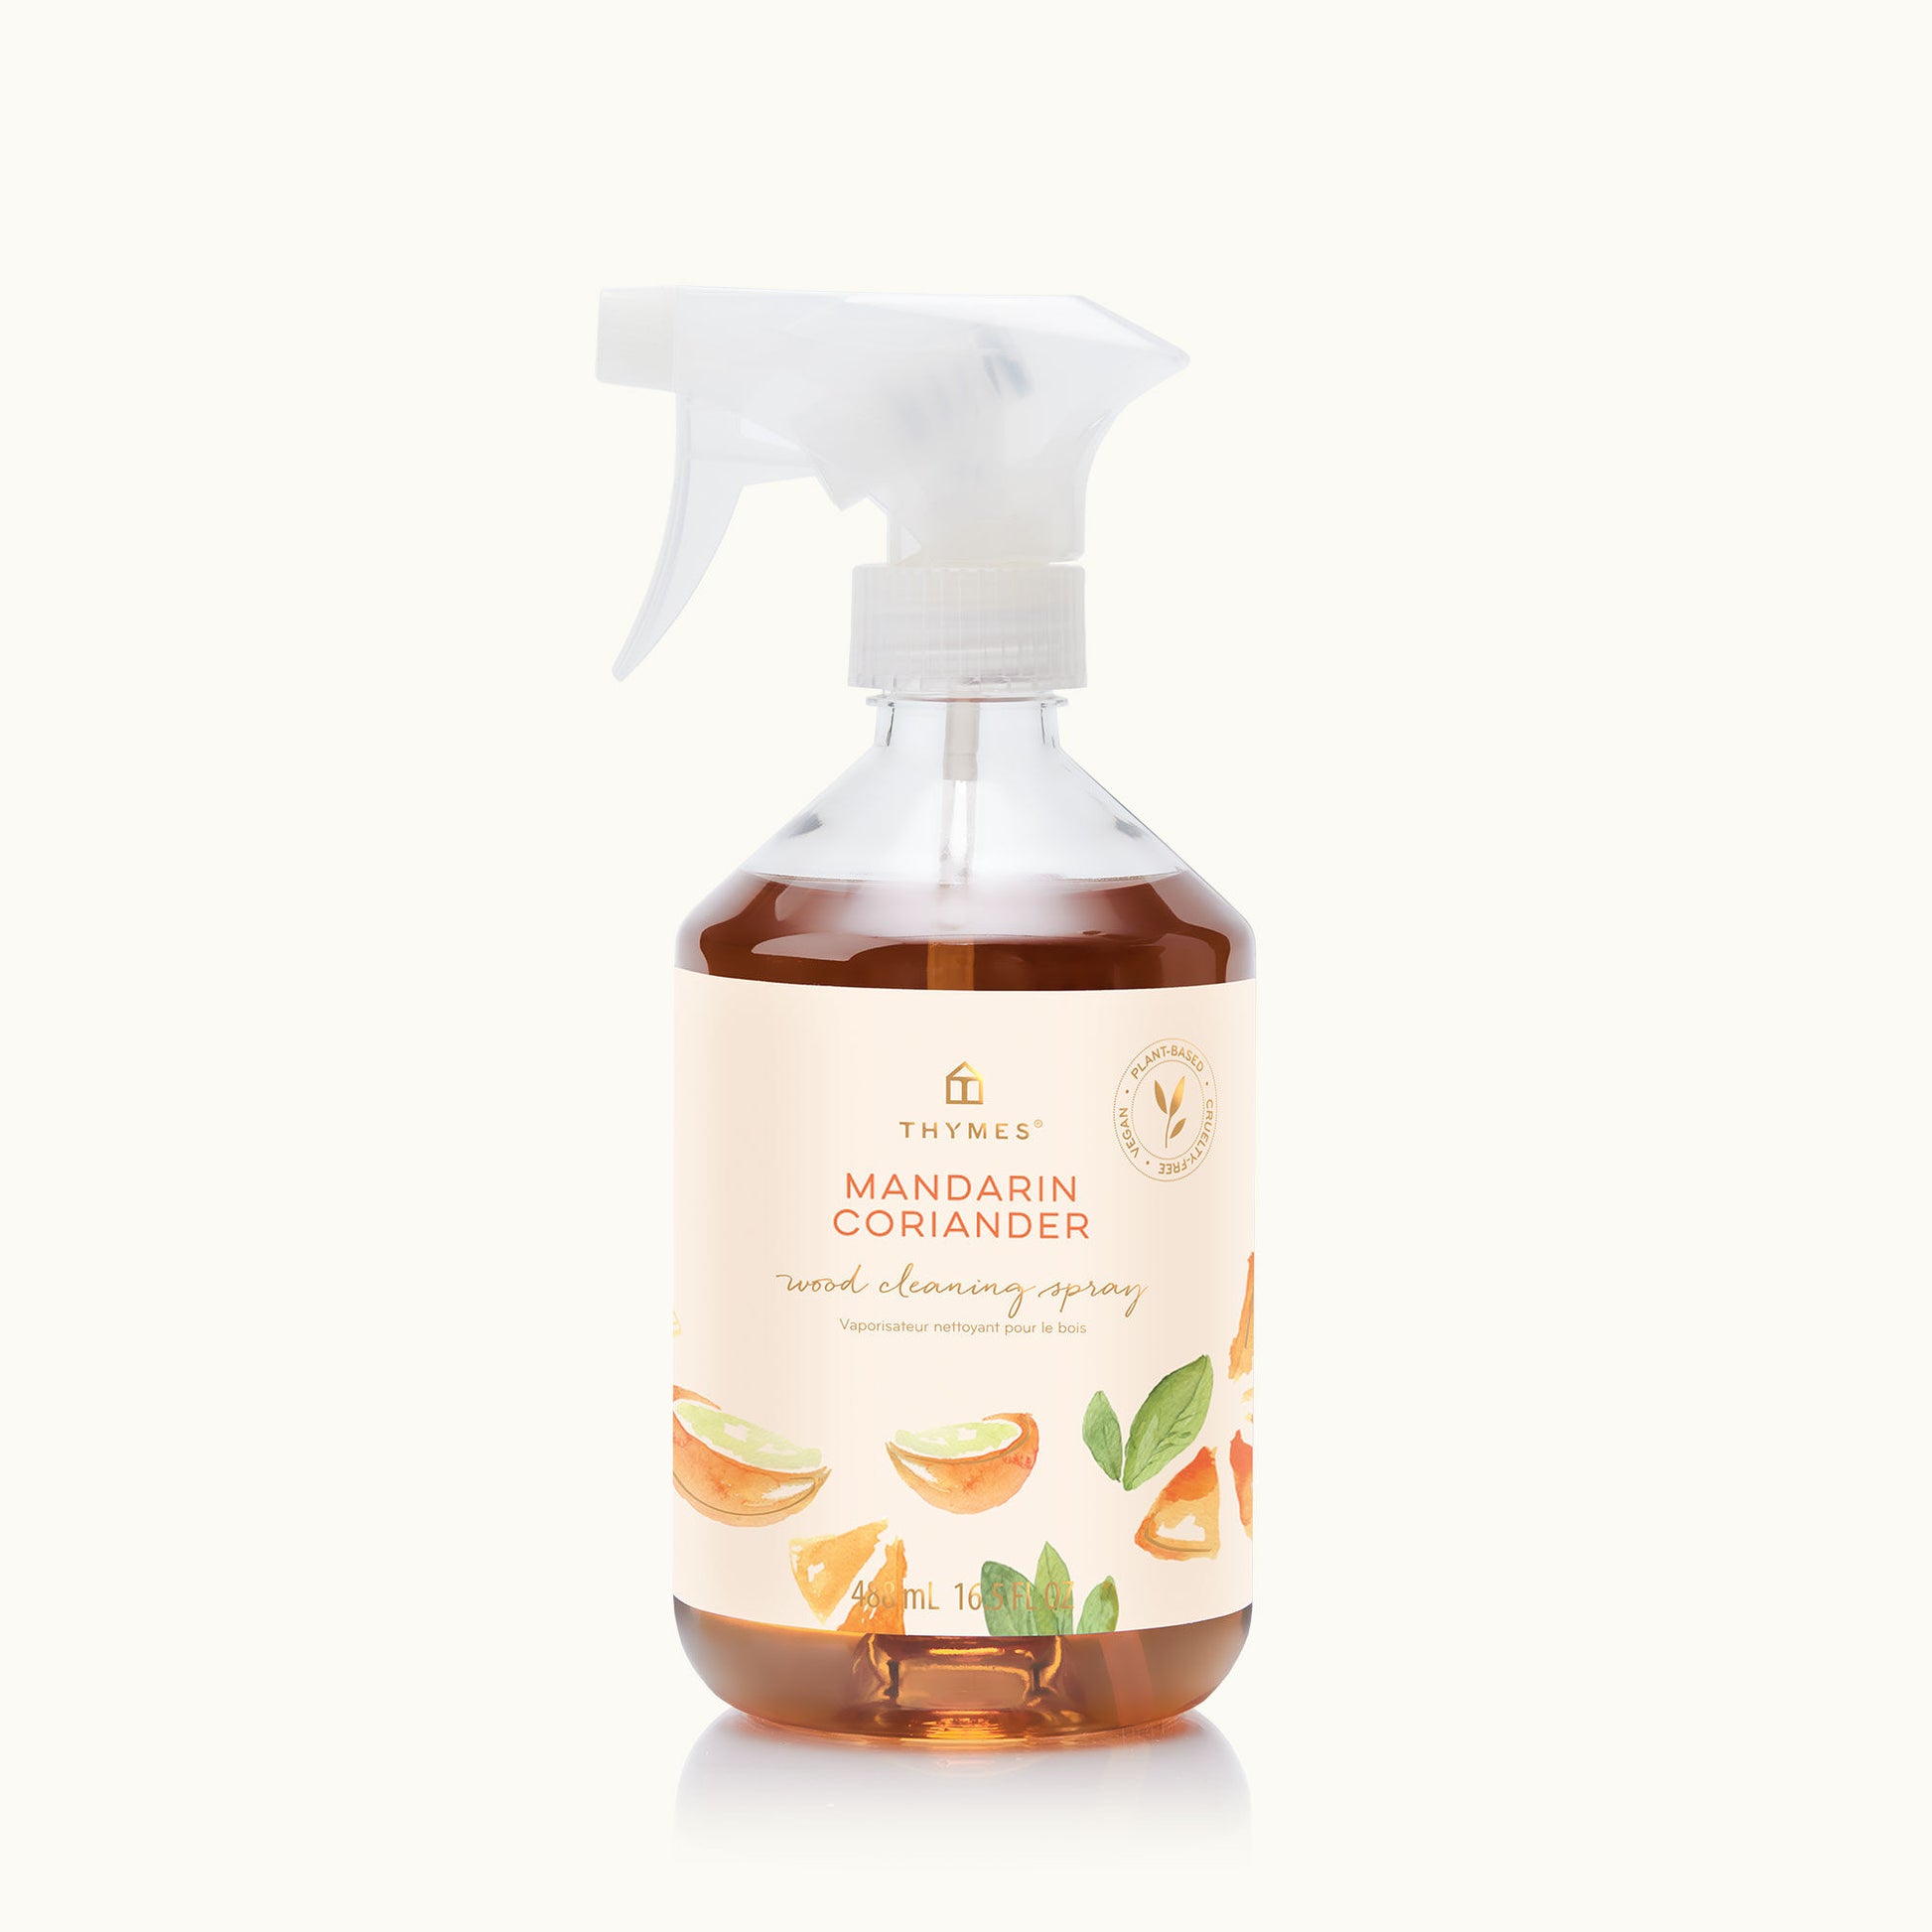 Mandarin Coriander Wood Cleaning Spray Gifts Thymes   